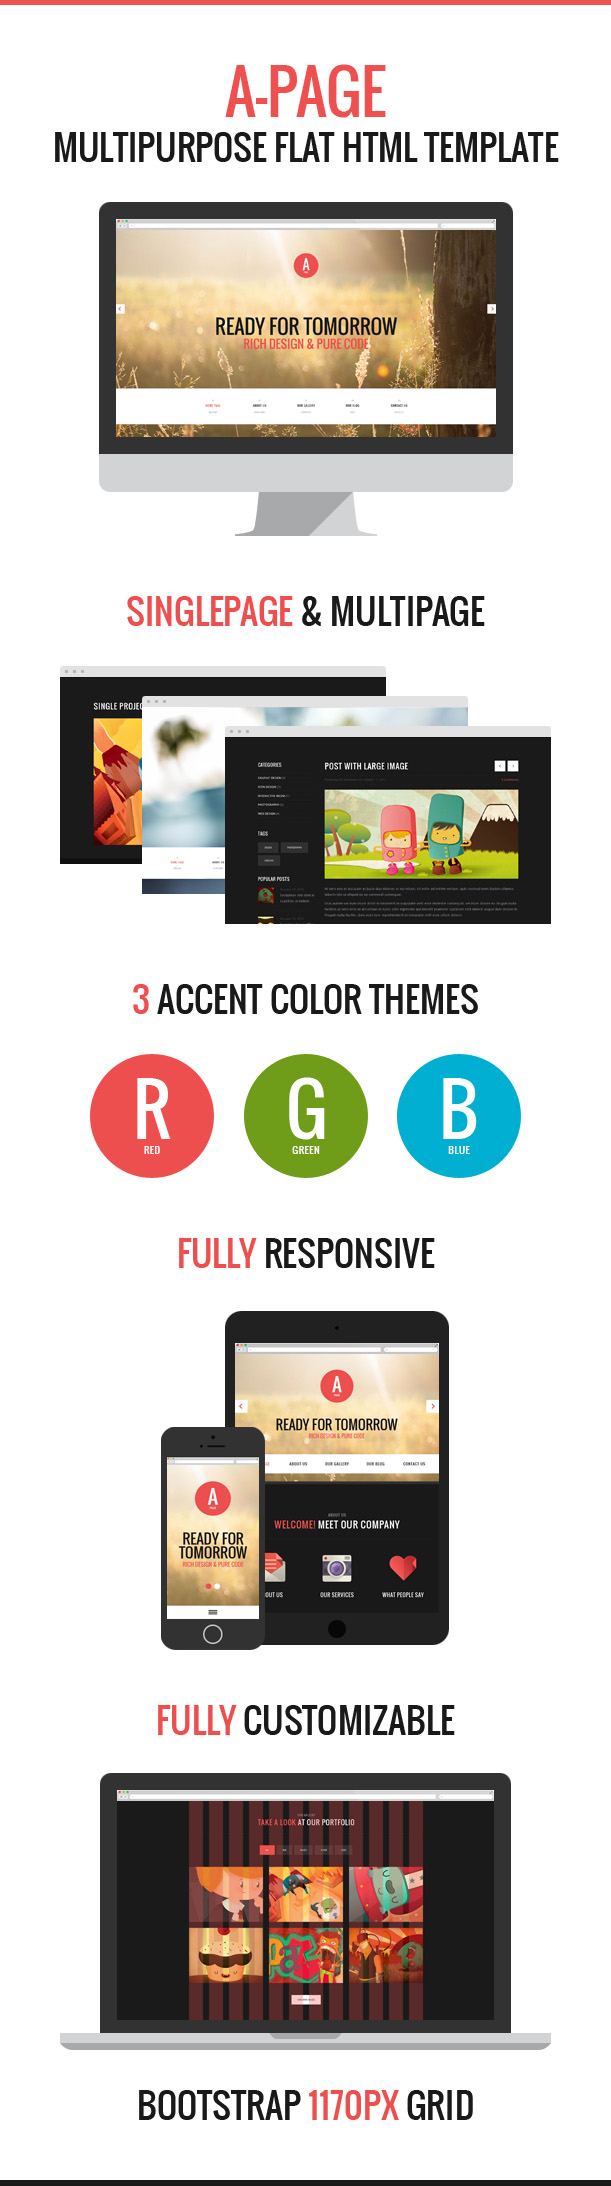 A-Page by DX Templates - multipurpose PSD template